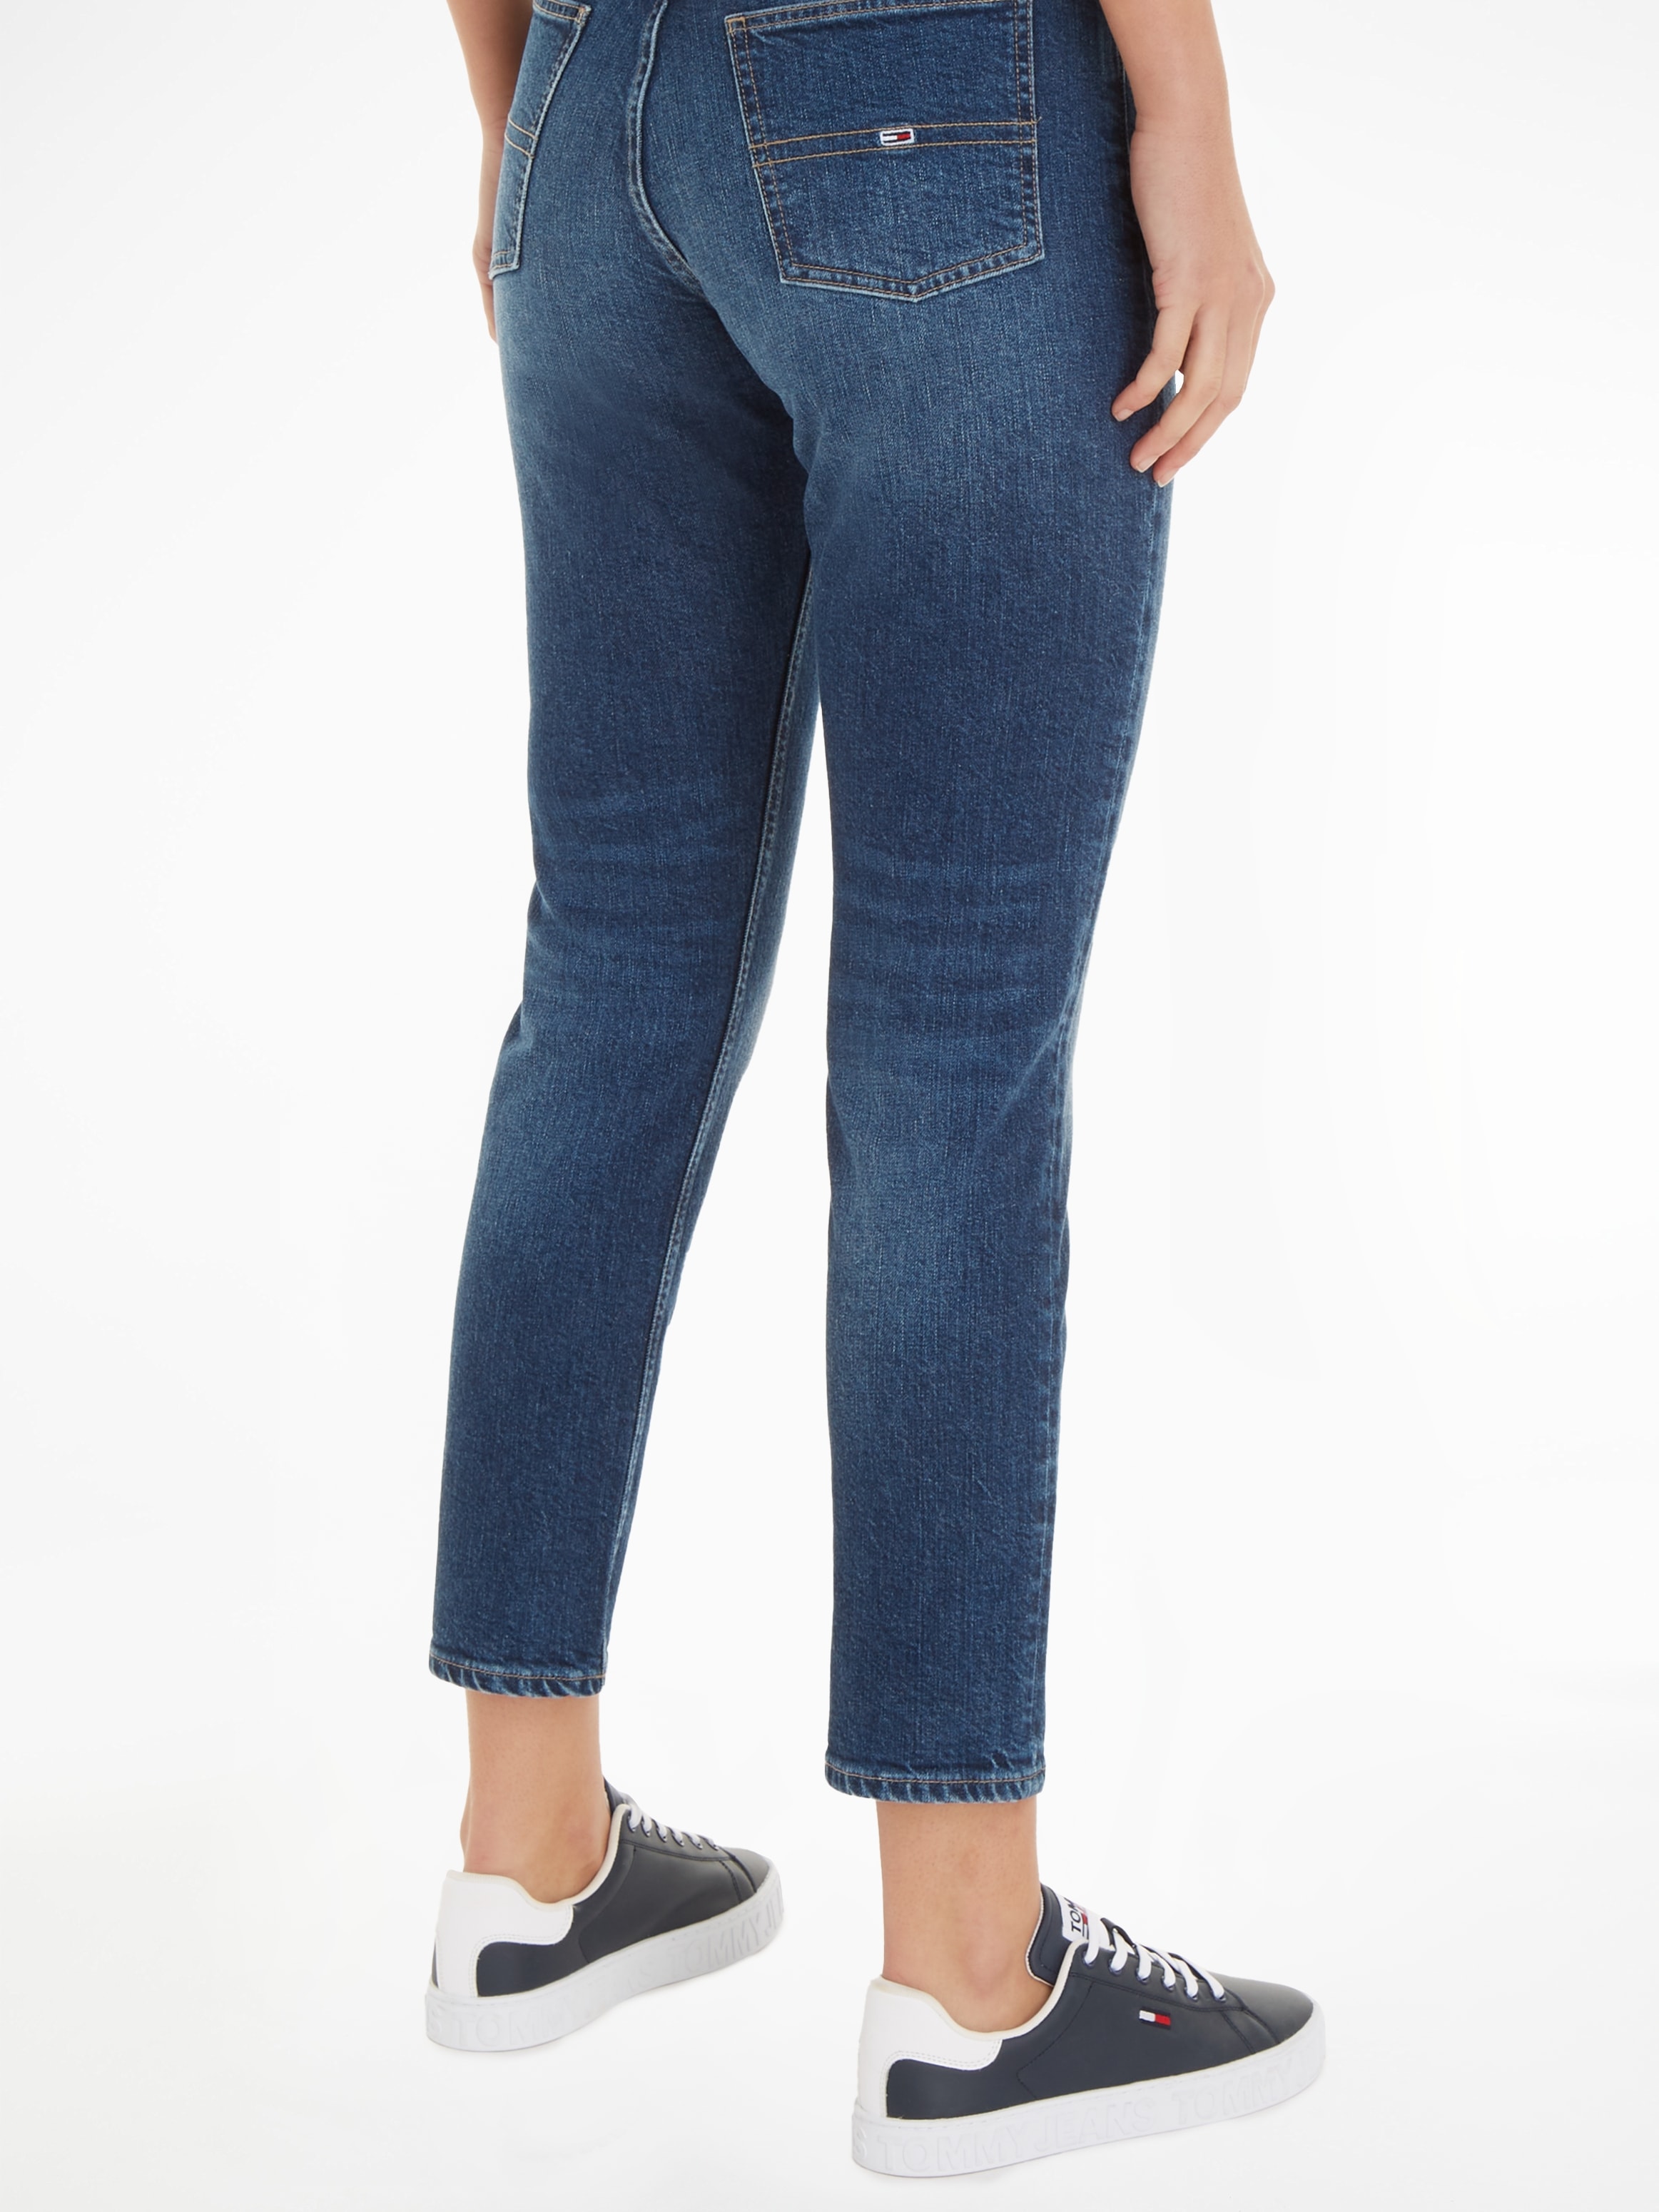 Tommy Jeans Slim-fit-Jeans »IZZIE HR bei SL OTTOversand ANK mit Tommy Logo-Badge CG4139«